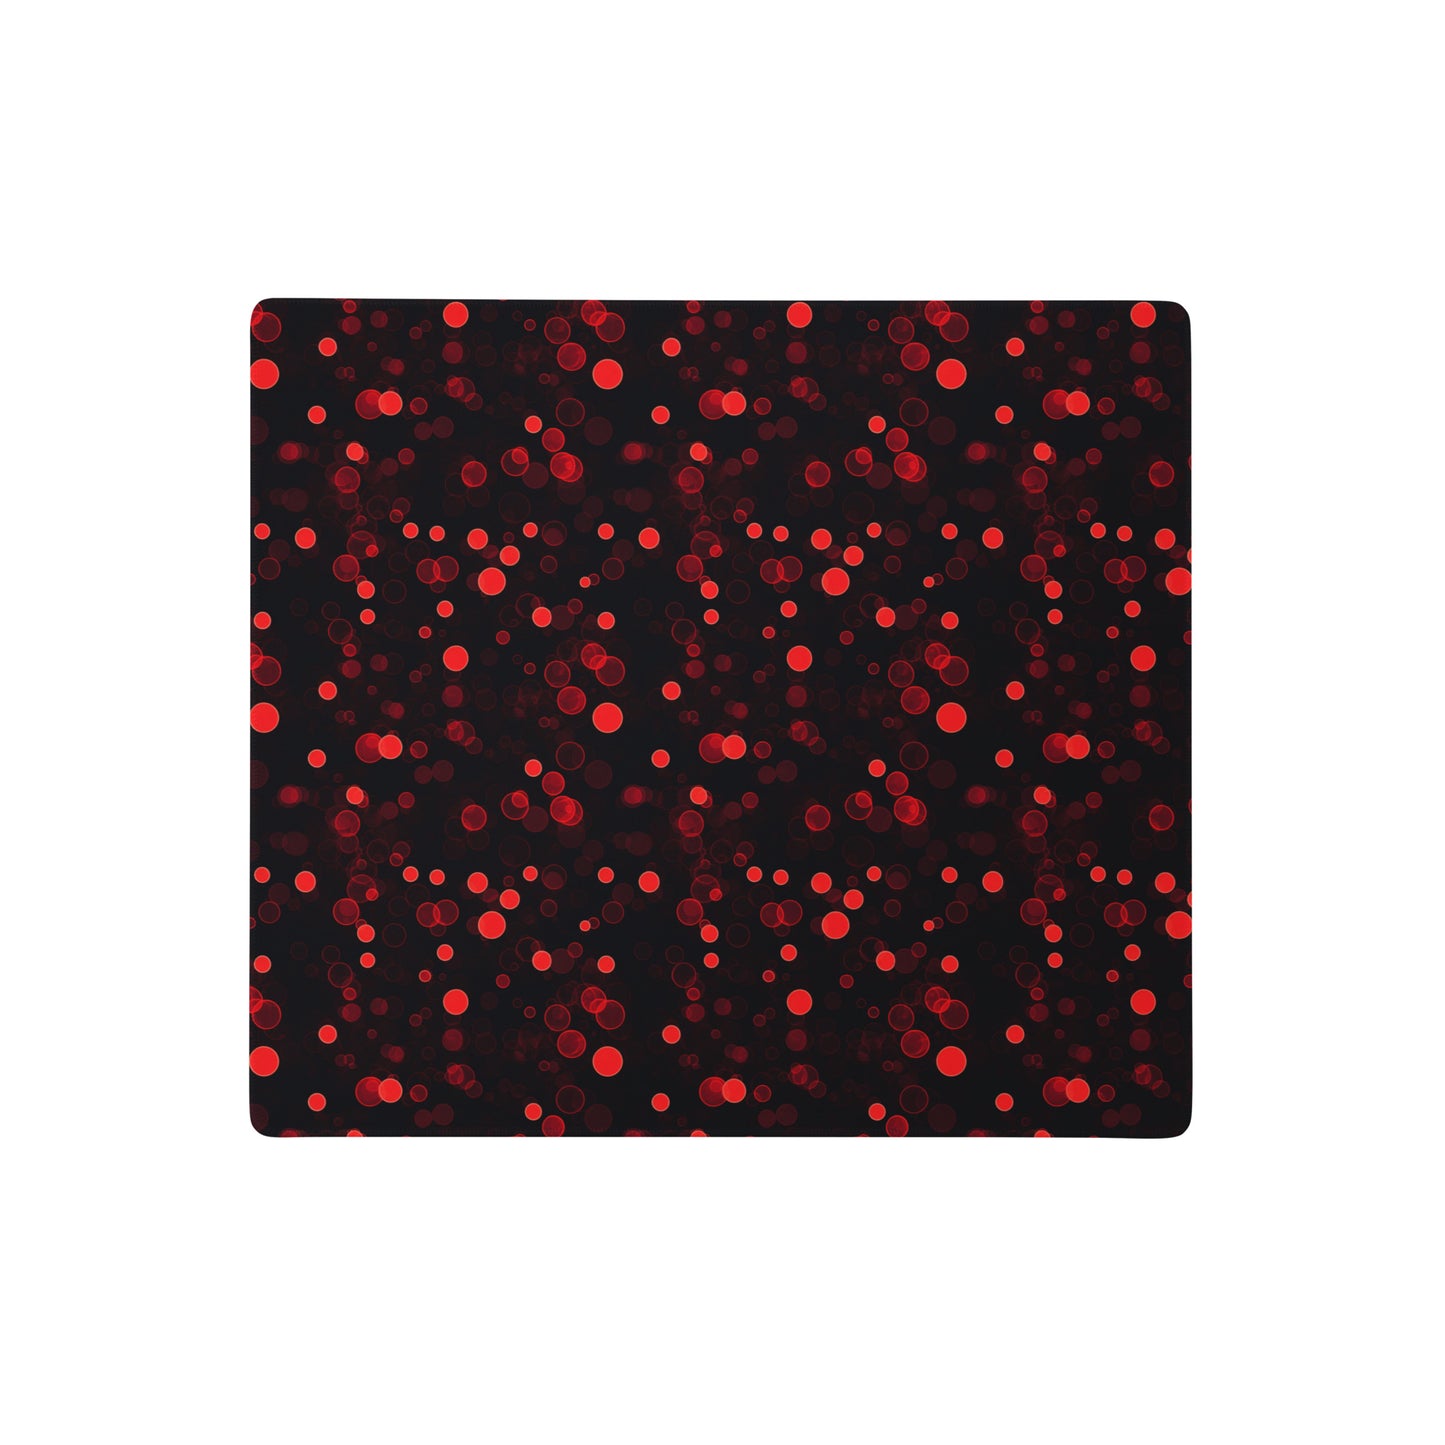 A 18" x 16" desk pad with red polka dots.